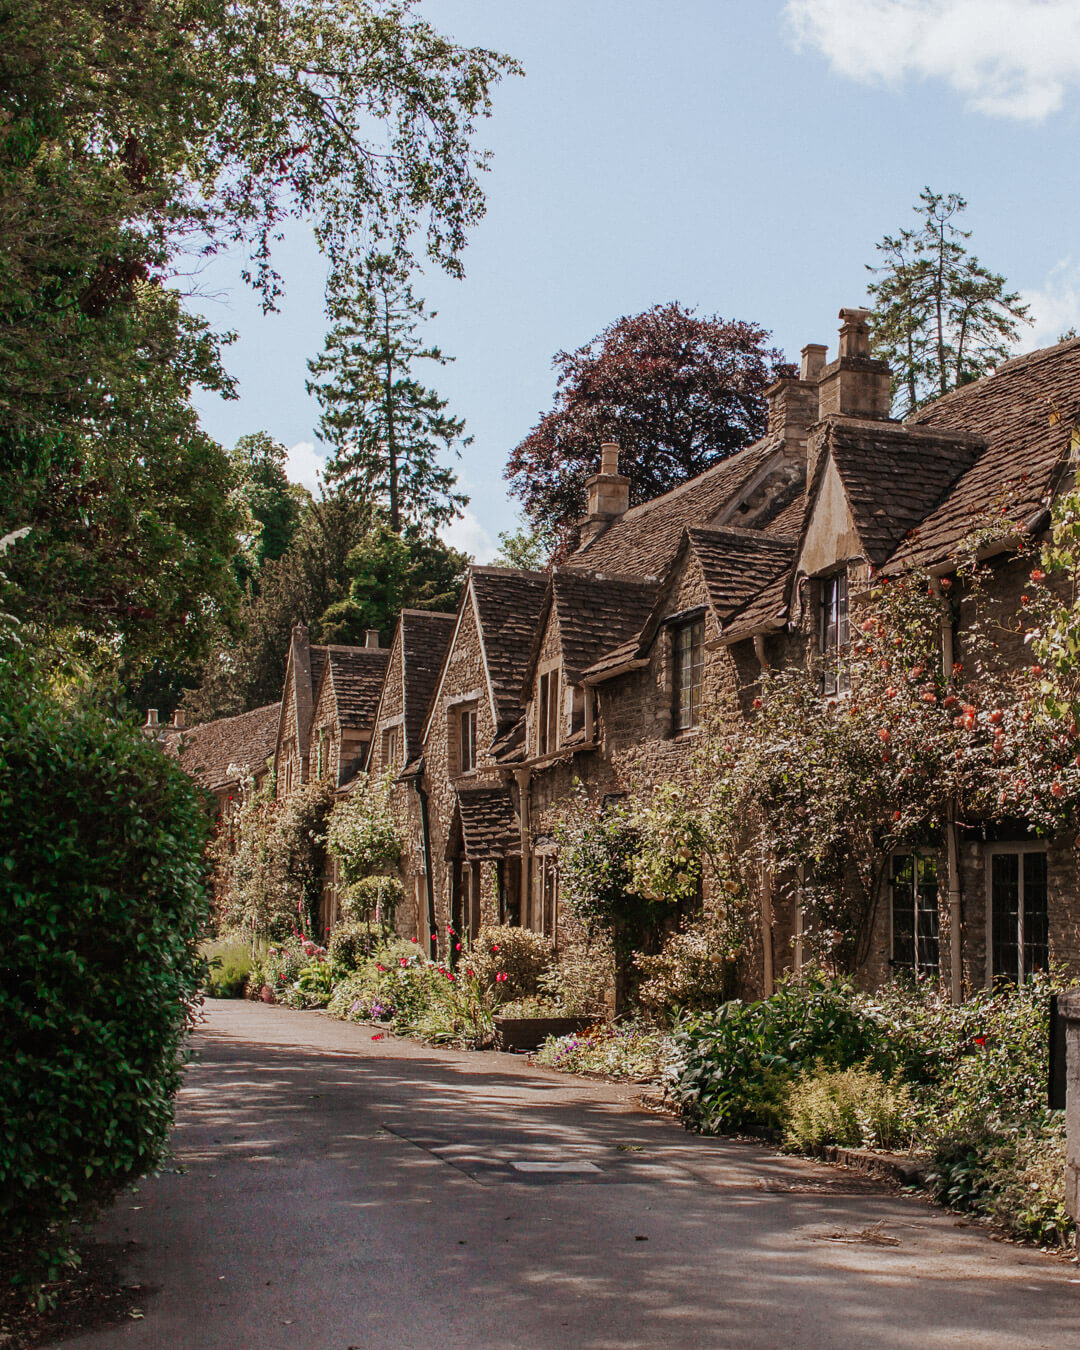 Visiting the Fairytale Cotswold Village of Castle Combe | ChelseaDinen.com